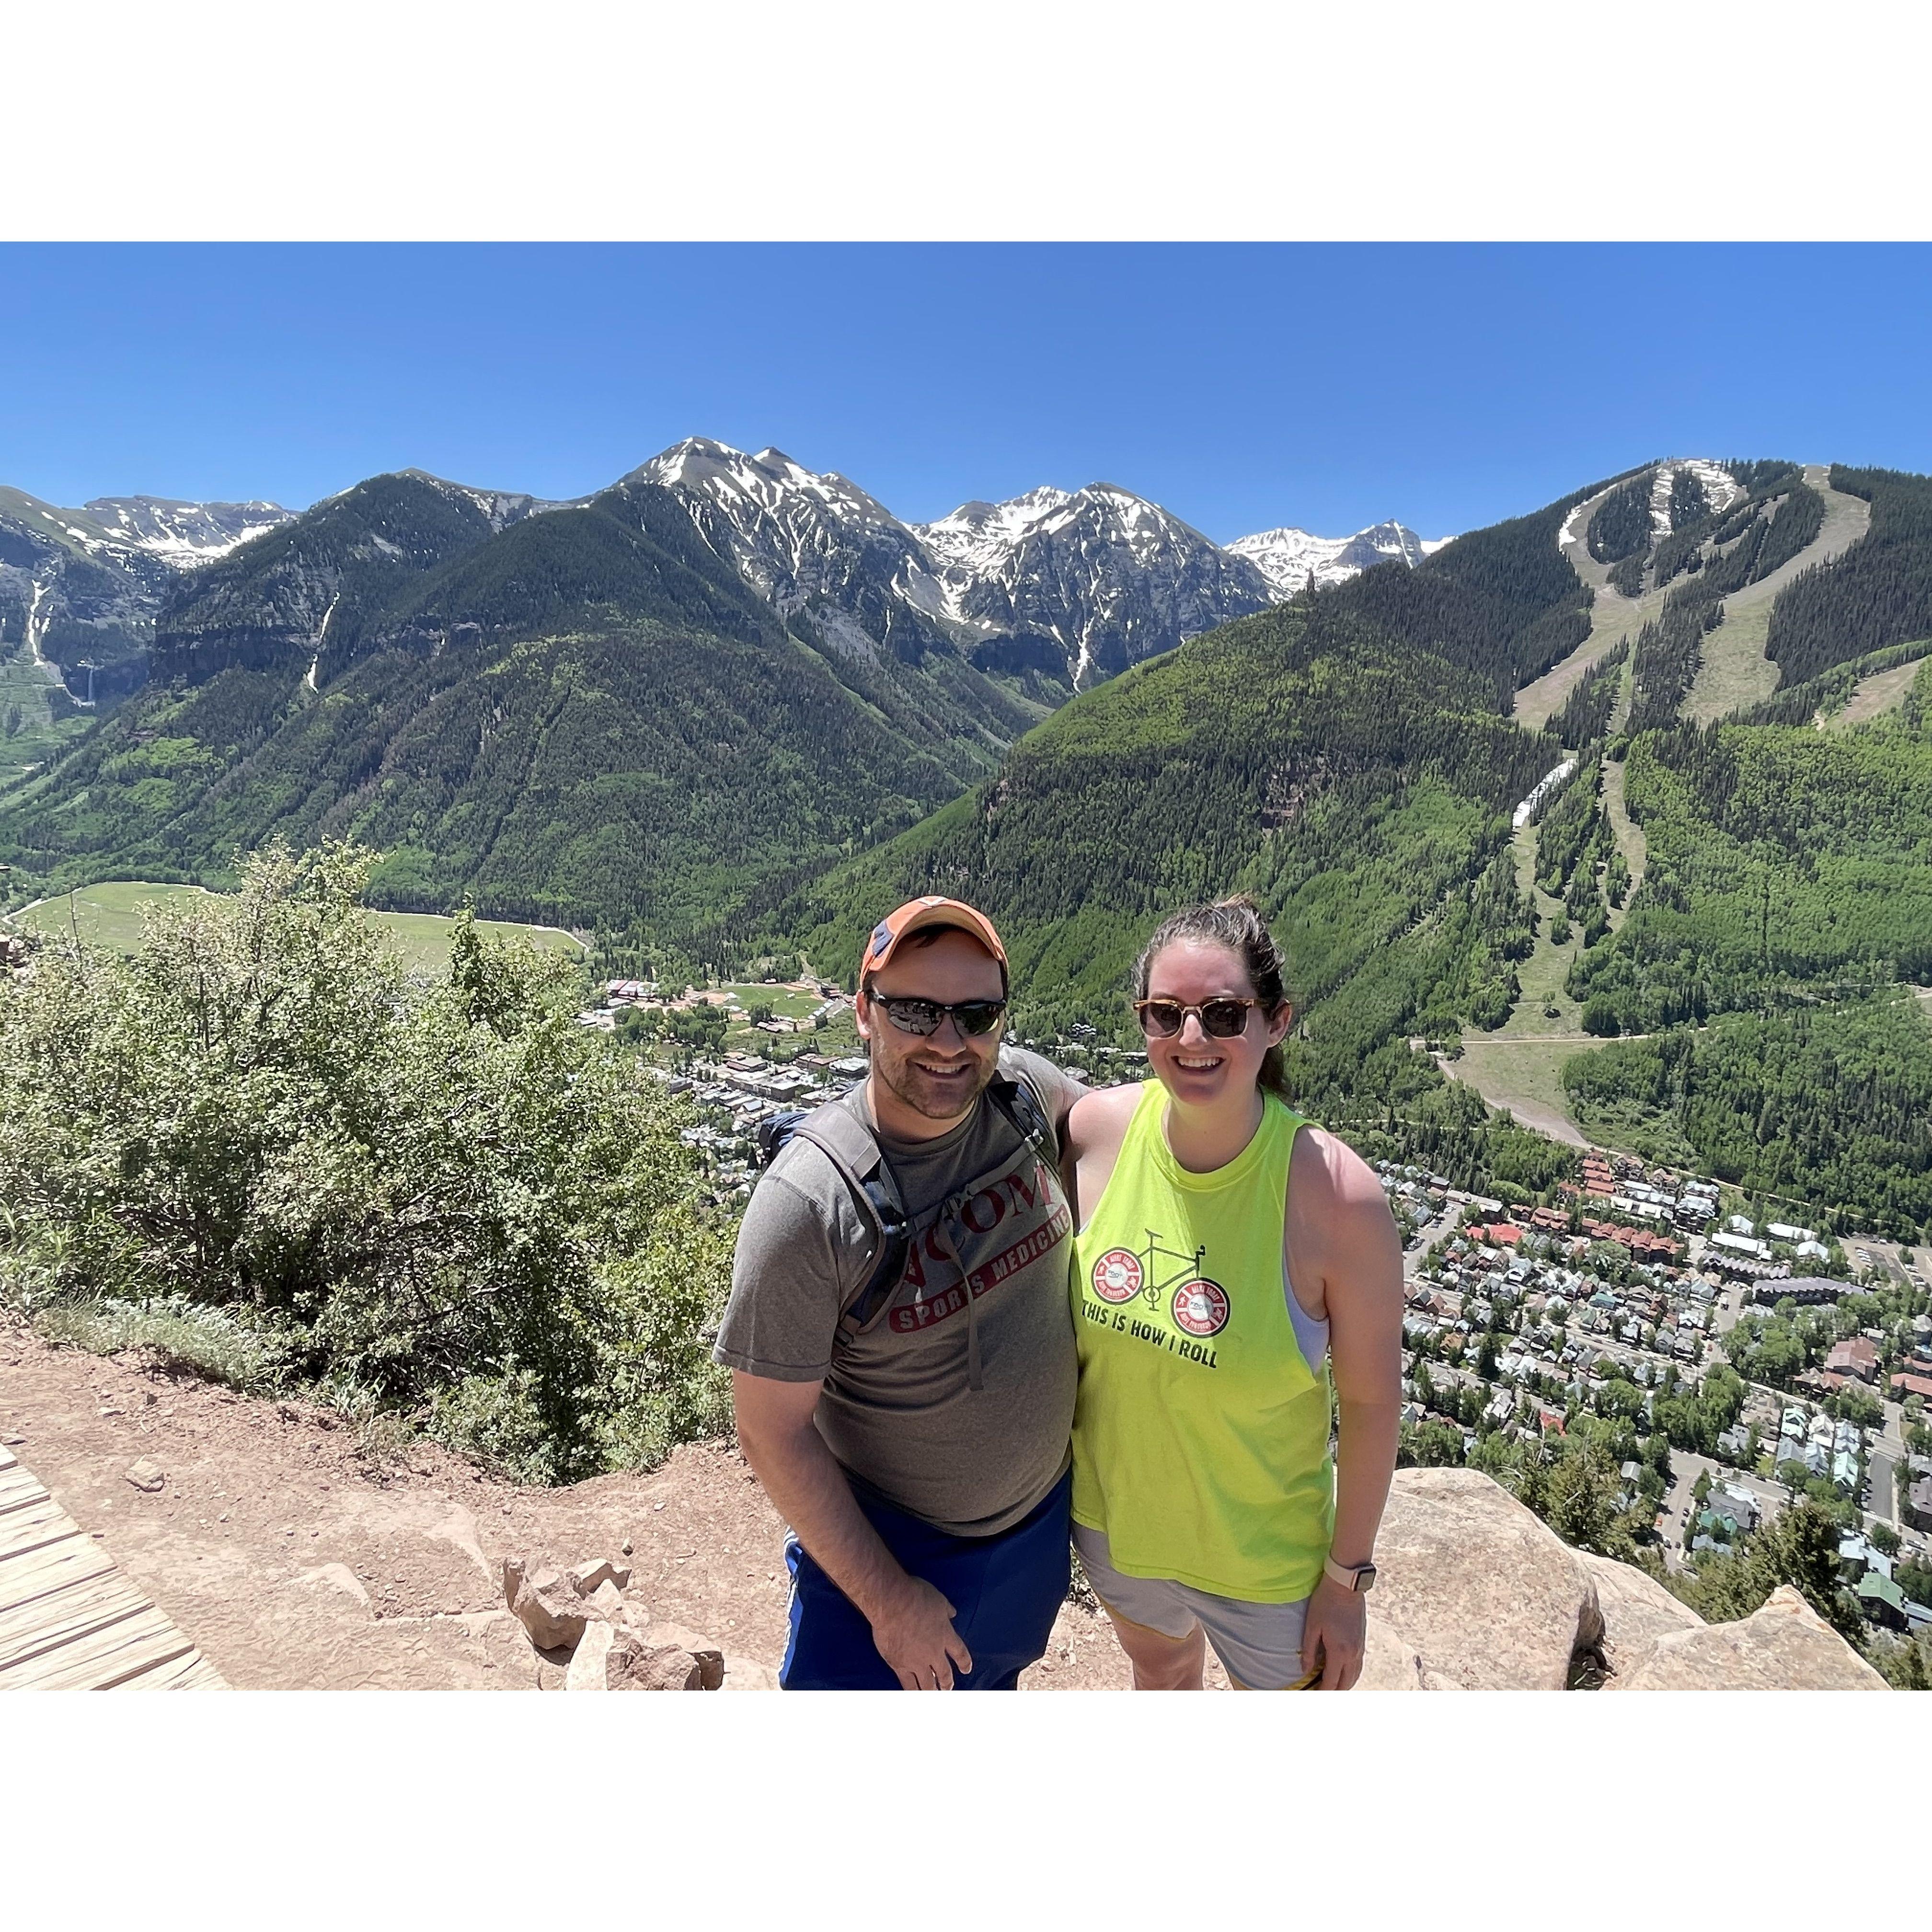 The infamous Telluride hike where I realized I don't really like hiking